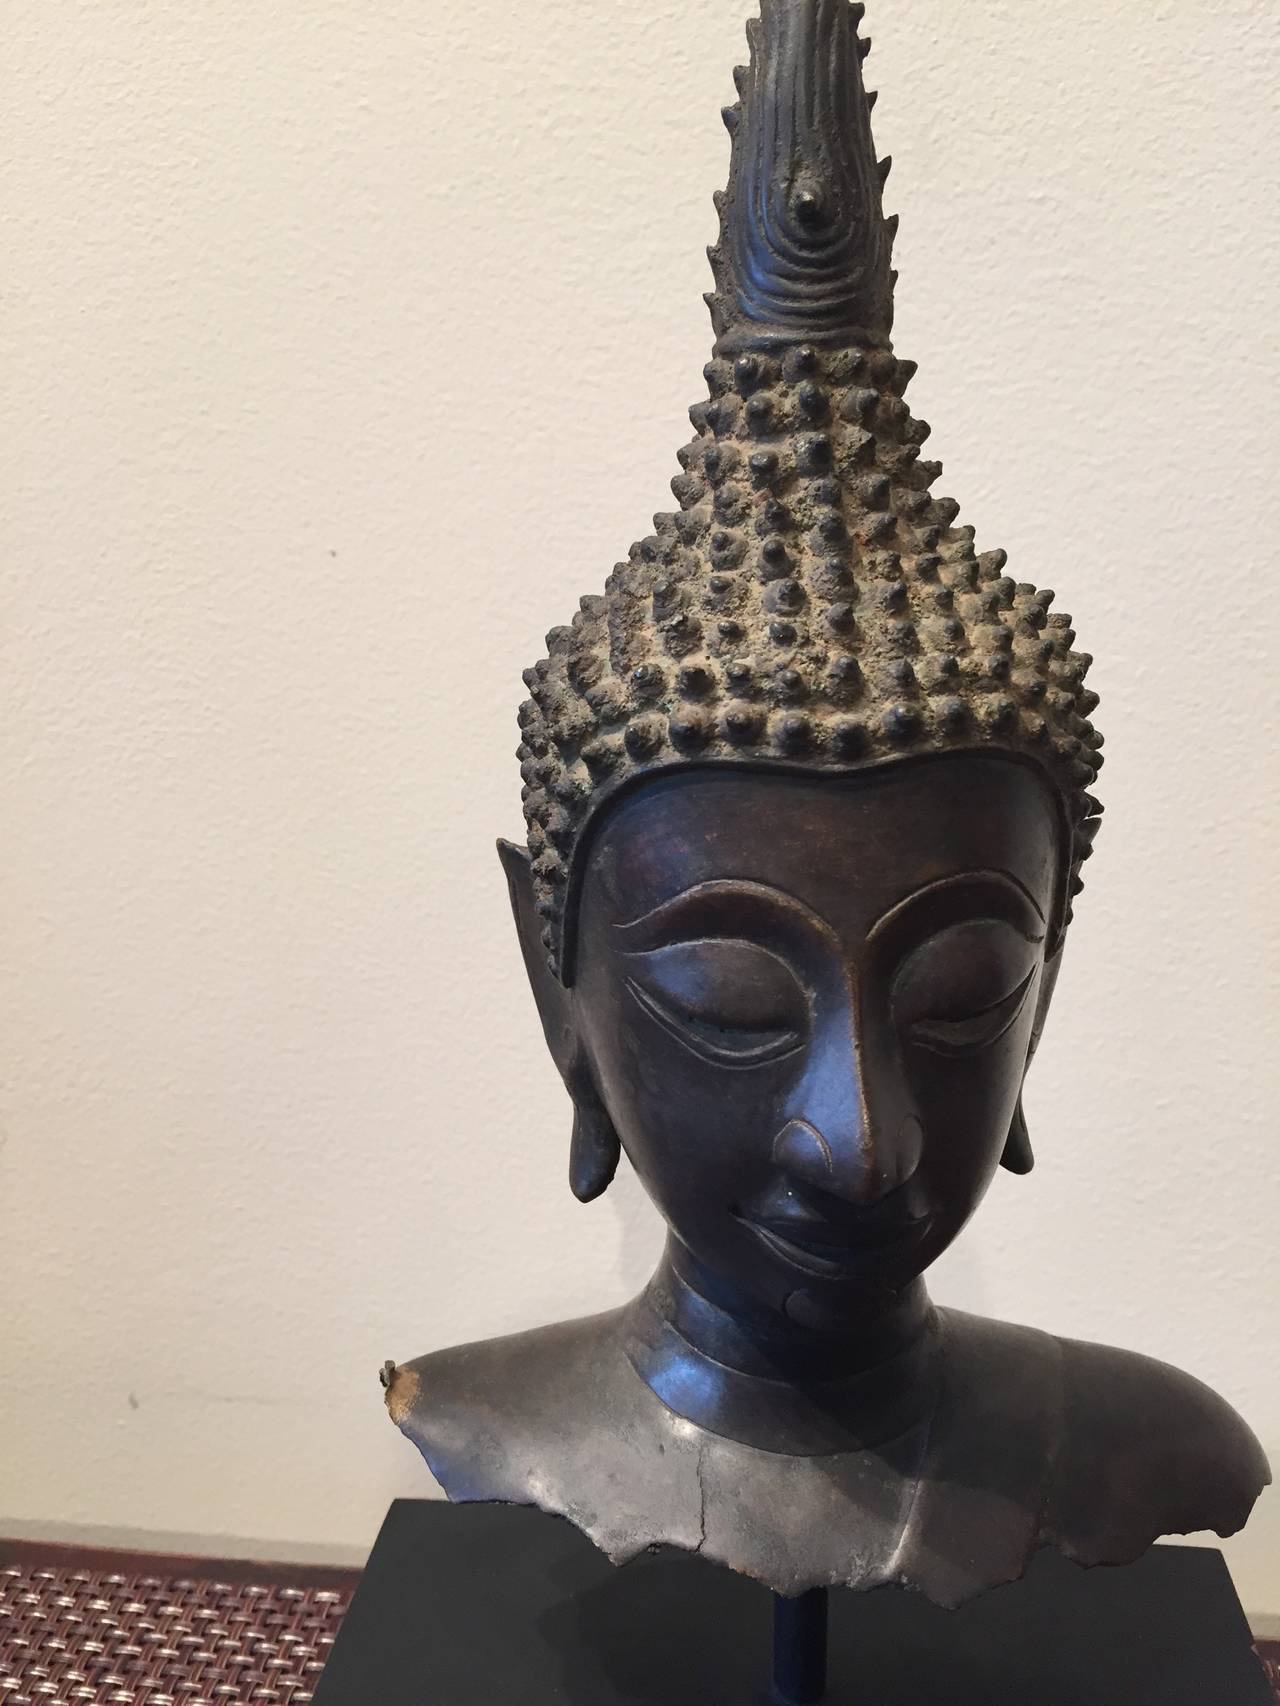 A striking, small Thai bronze Buddha bust floating over a simple black base. Thailand, c. 1920.
Measurements:  
Buddha : L: 6.5  D: 2.5 H: 10 
With Stand: L: 6.5  D: 3.5  H:13
BH2010